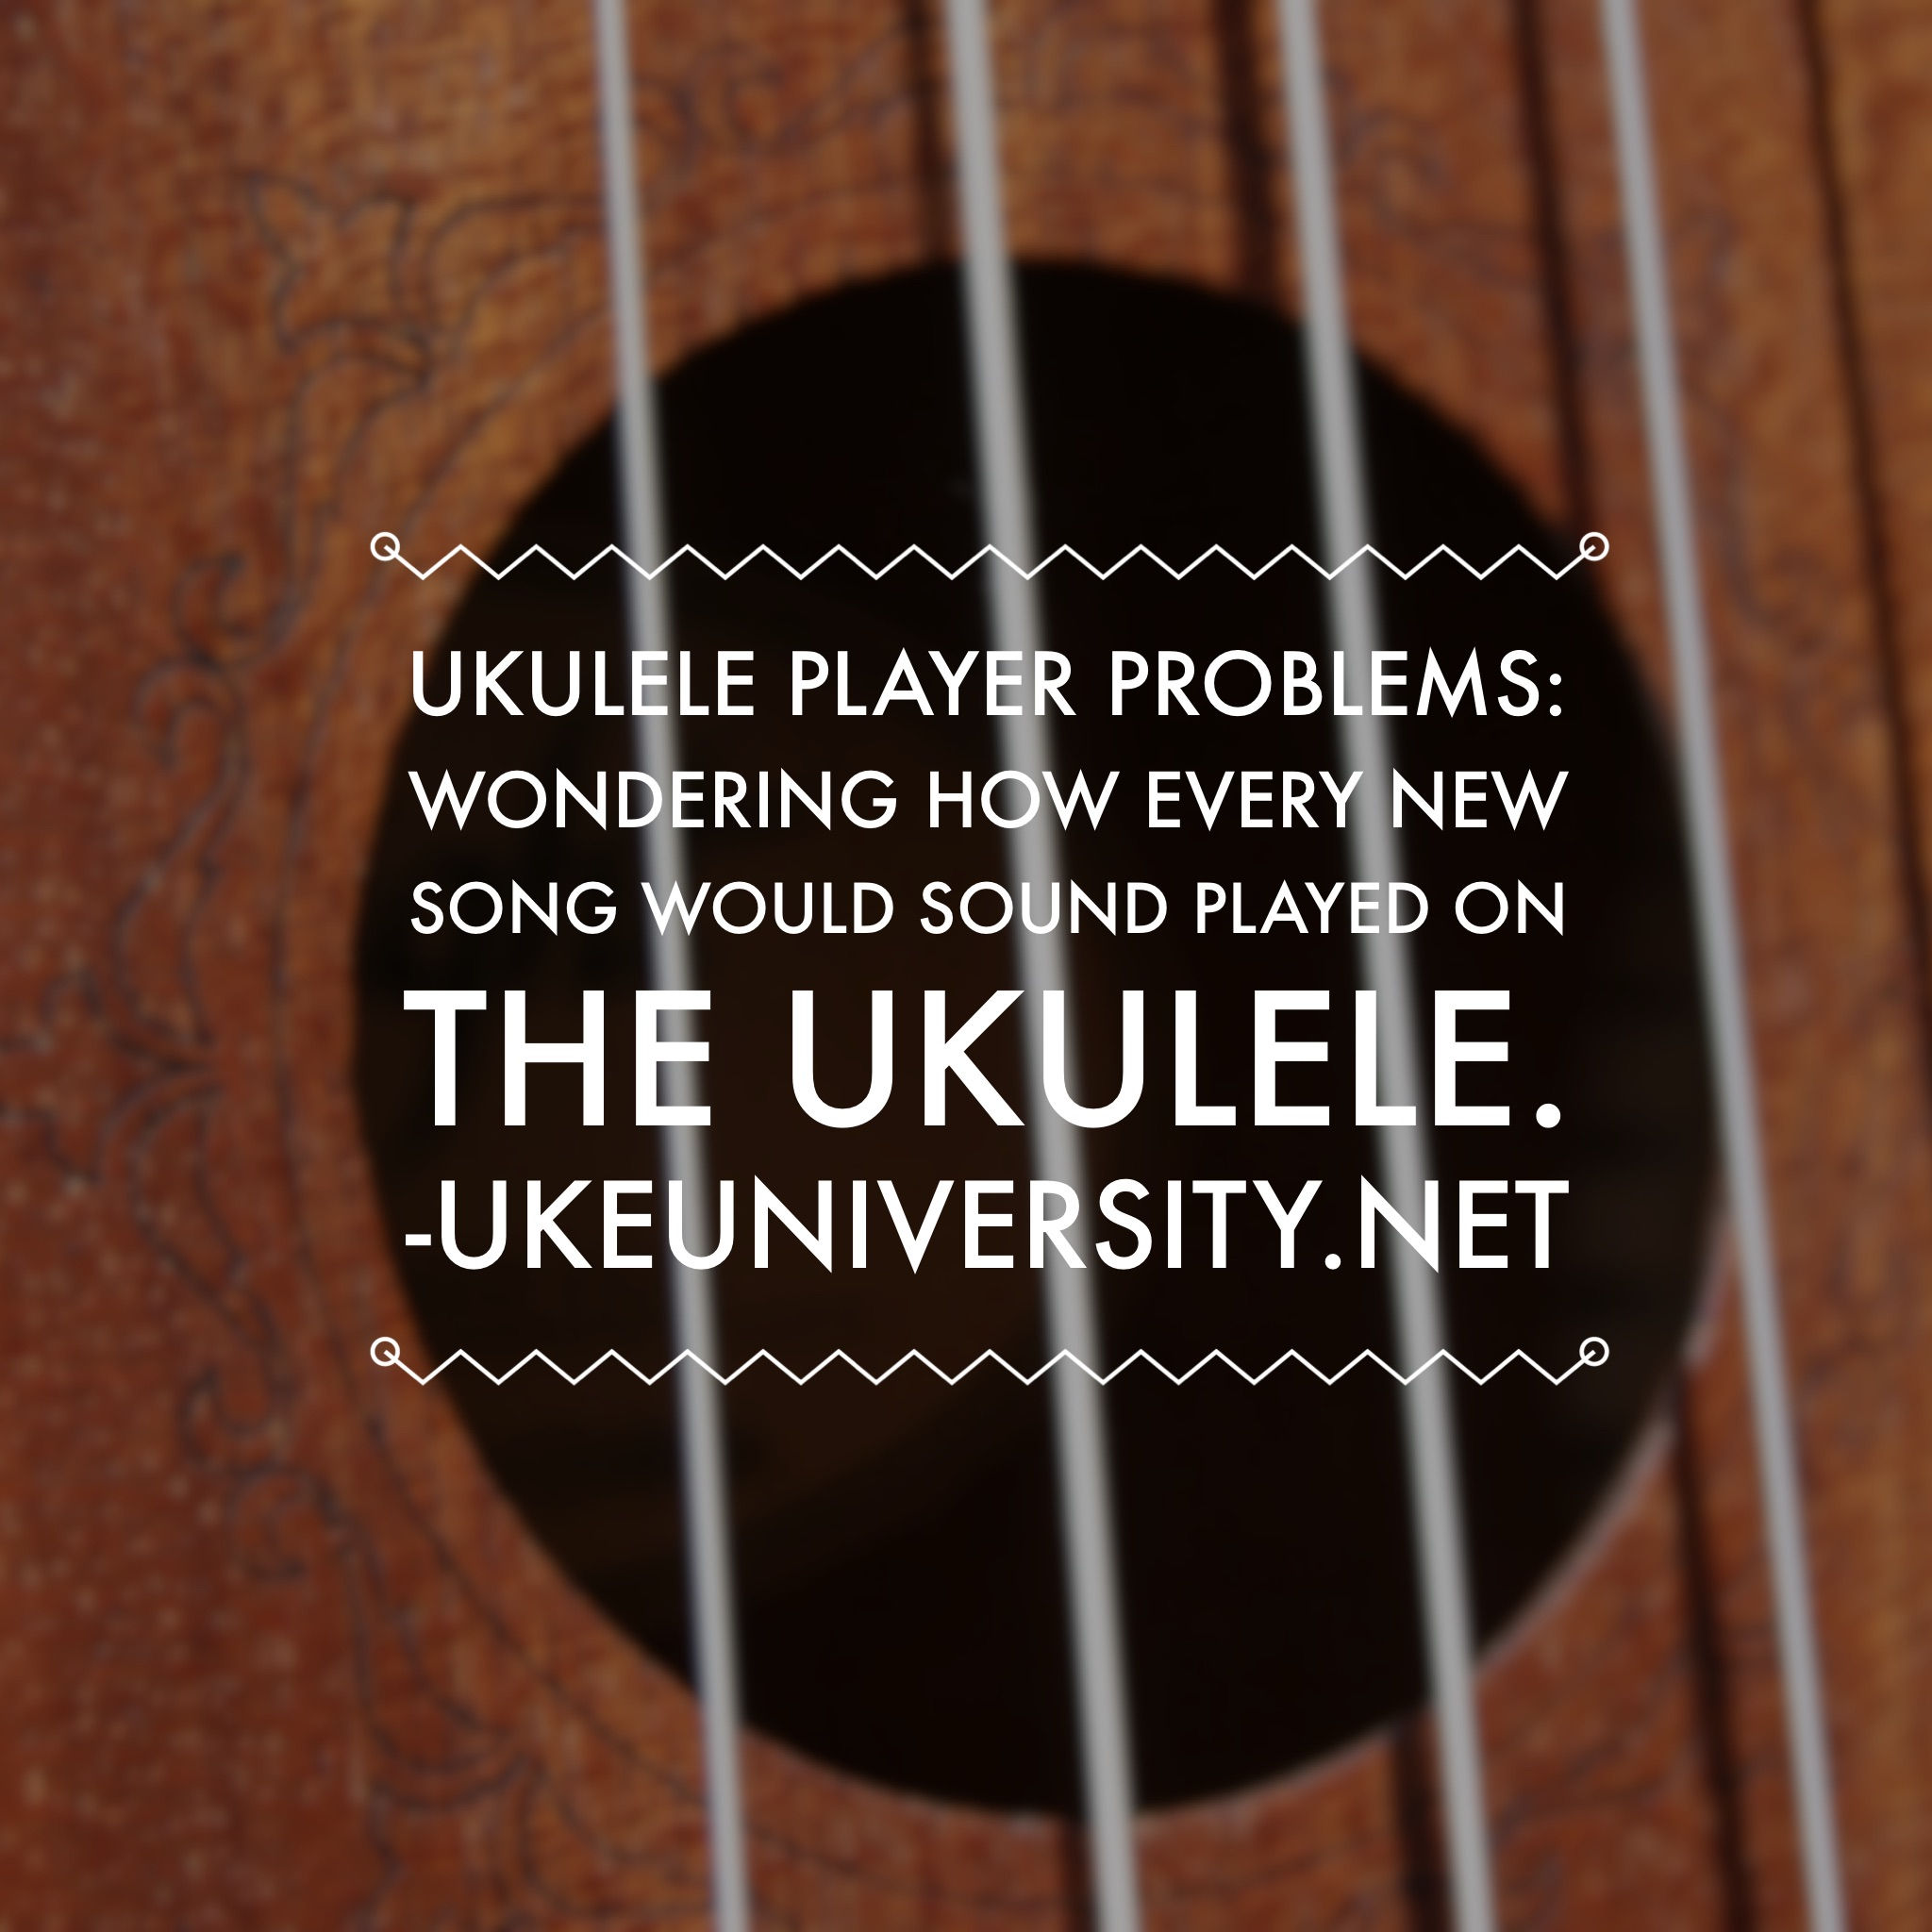 Ukulele player problems cover songs